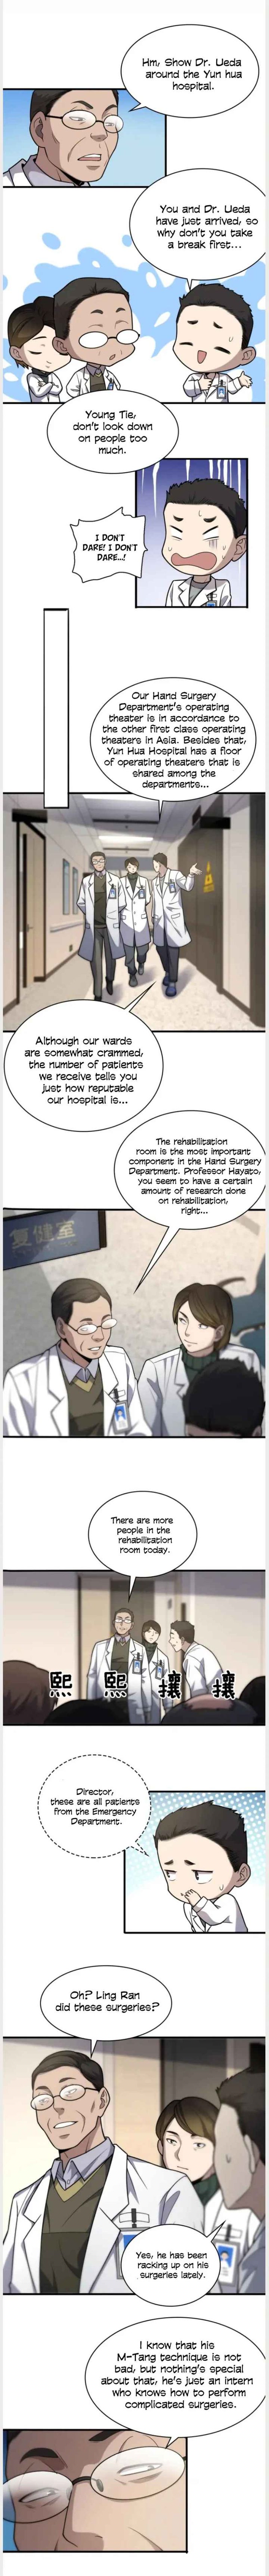 great_doctor_ling_ran_51_8